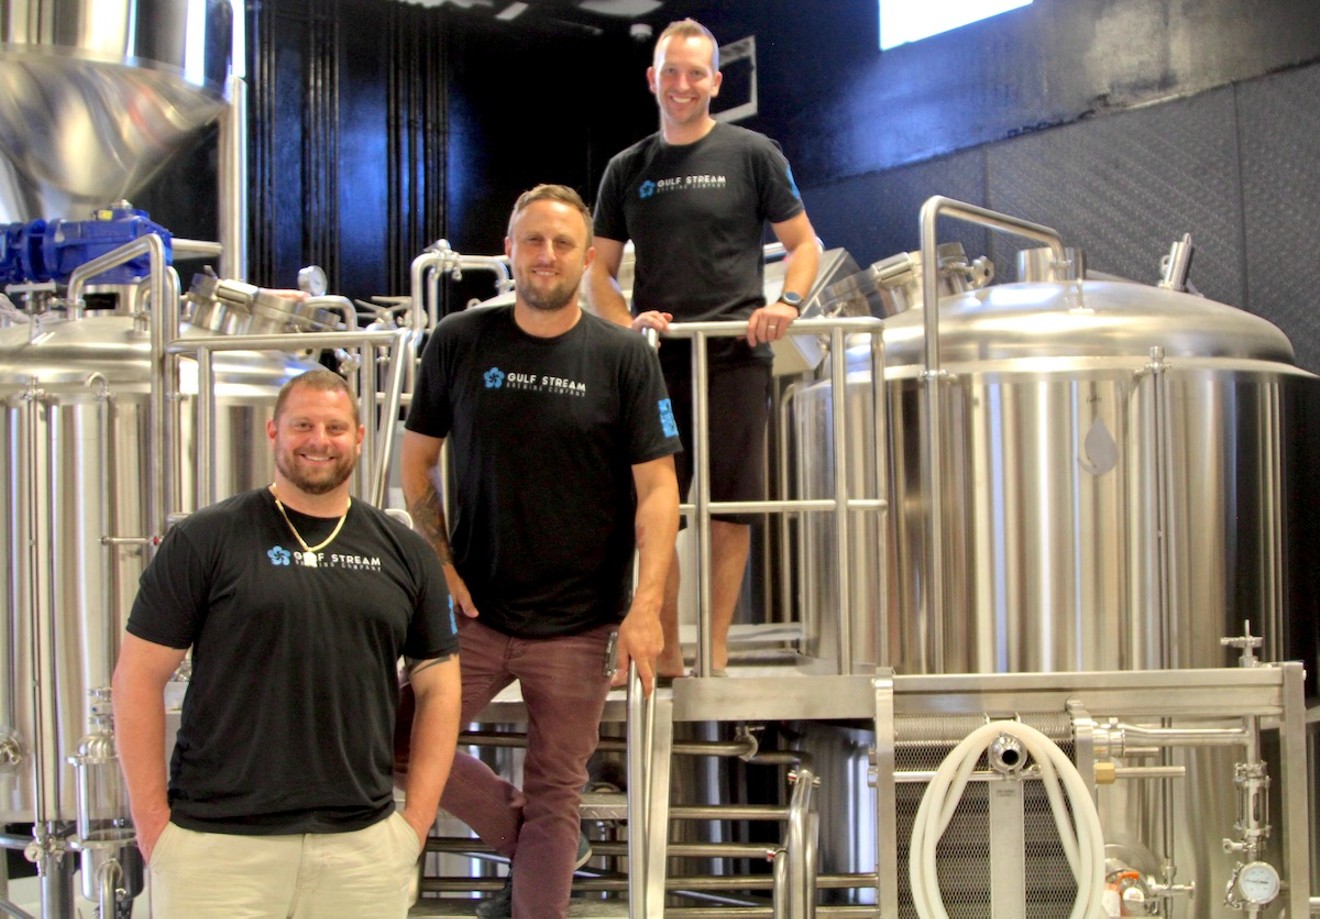 Gulf Stream Brewing will open Saturday, September 22 with head brewer Mike Demetrus (center) alongside founders Ty Eriks (left) and McKay Ferrell (right).